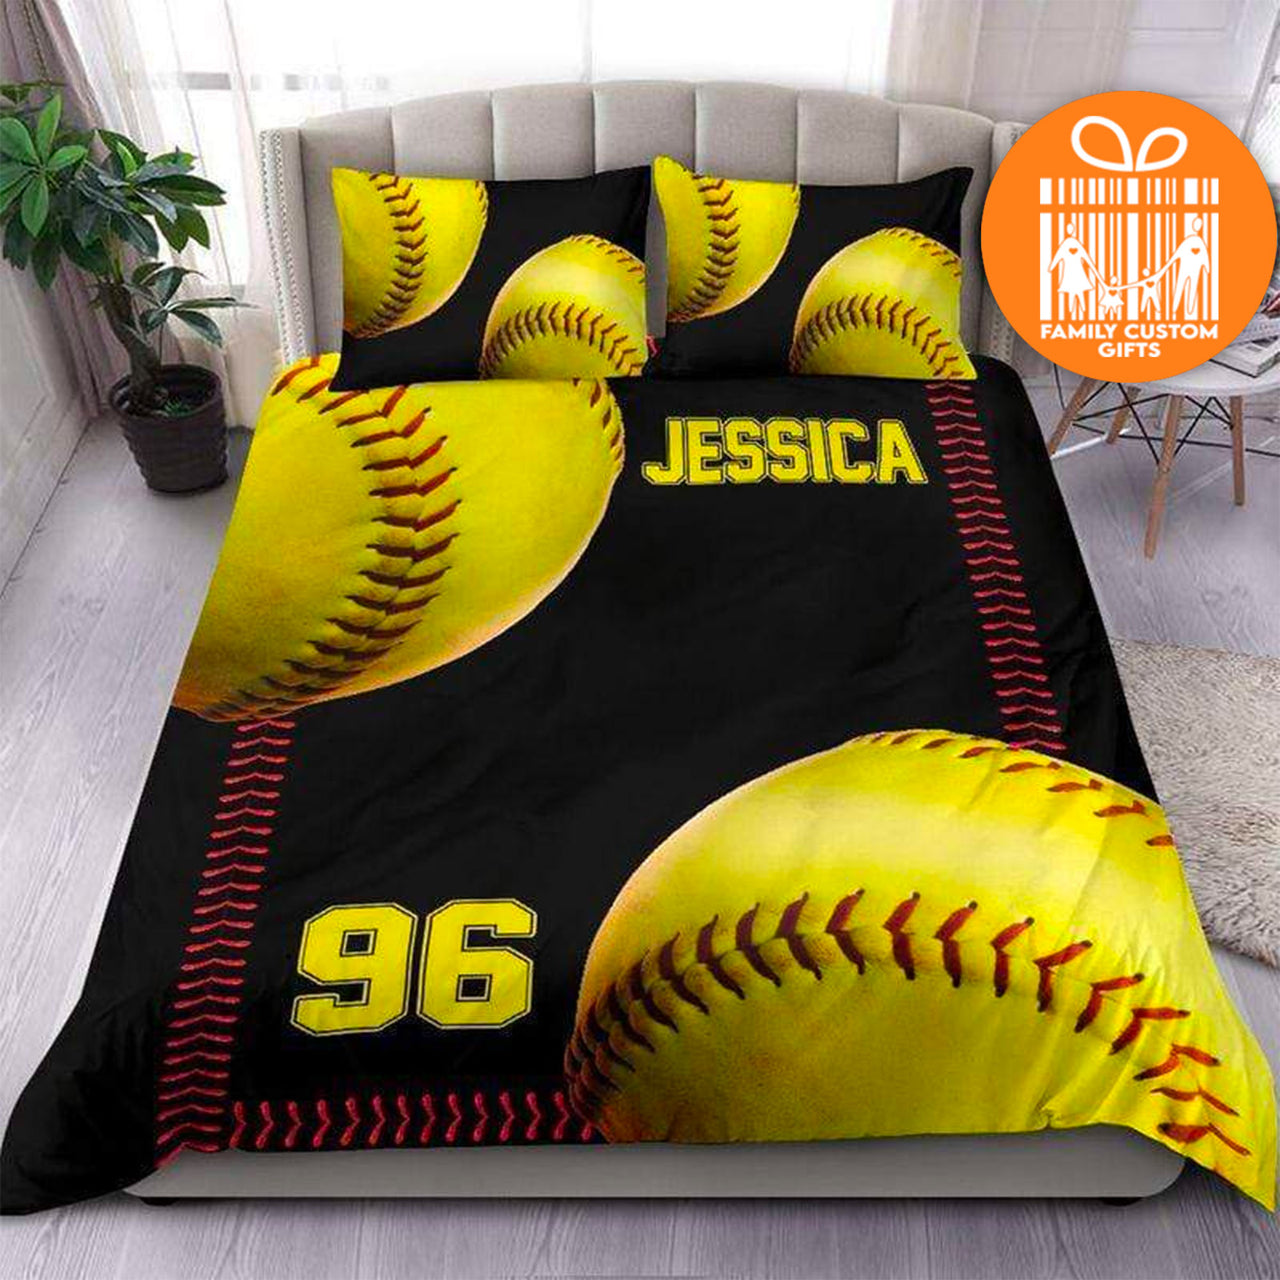 Comforter Vintage Softball Glove And Ball Custom Bedding Set for Kids Teens Adult Personalized Premium Bed Set